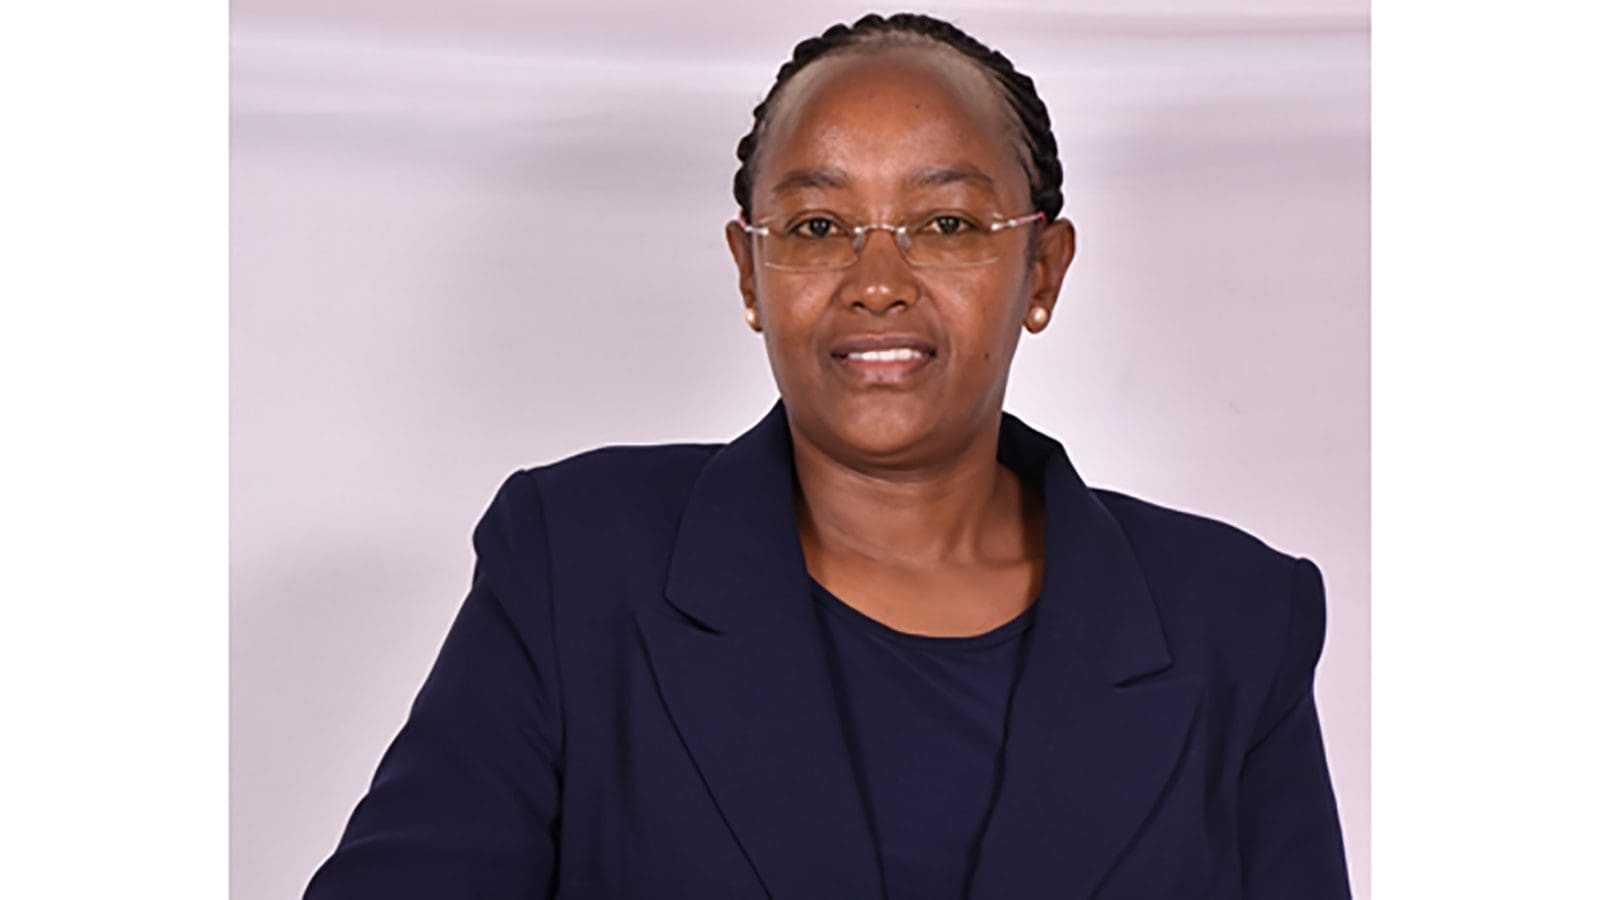 KEBS Standards Director appointed as Acting Managing Director